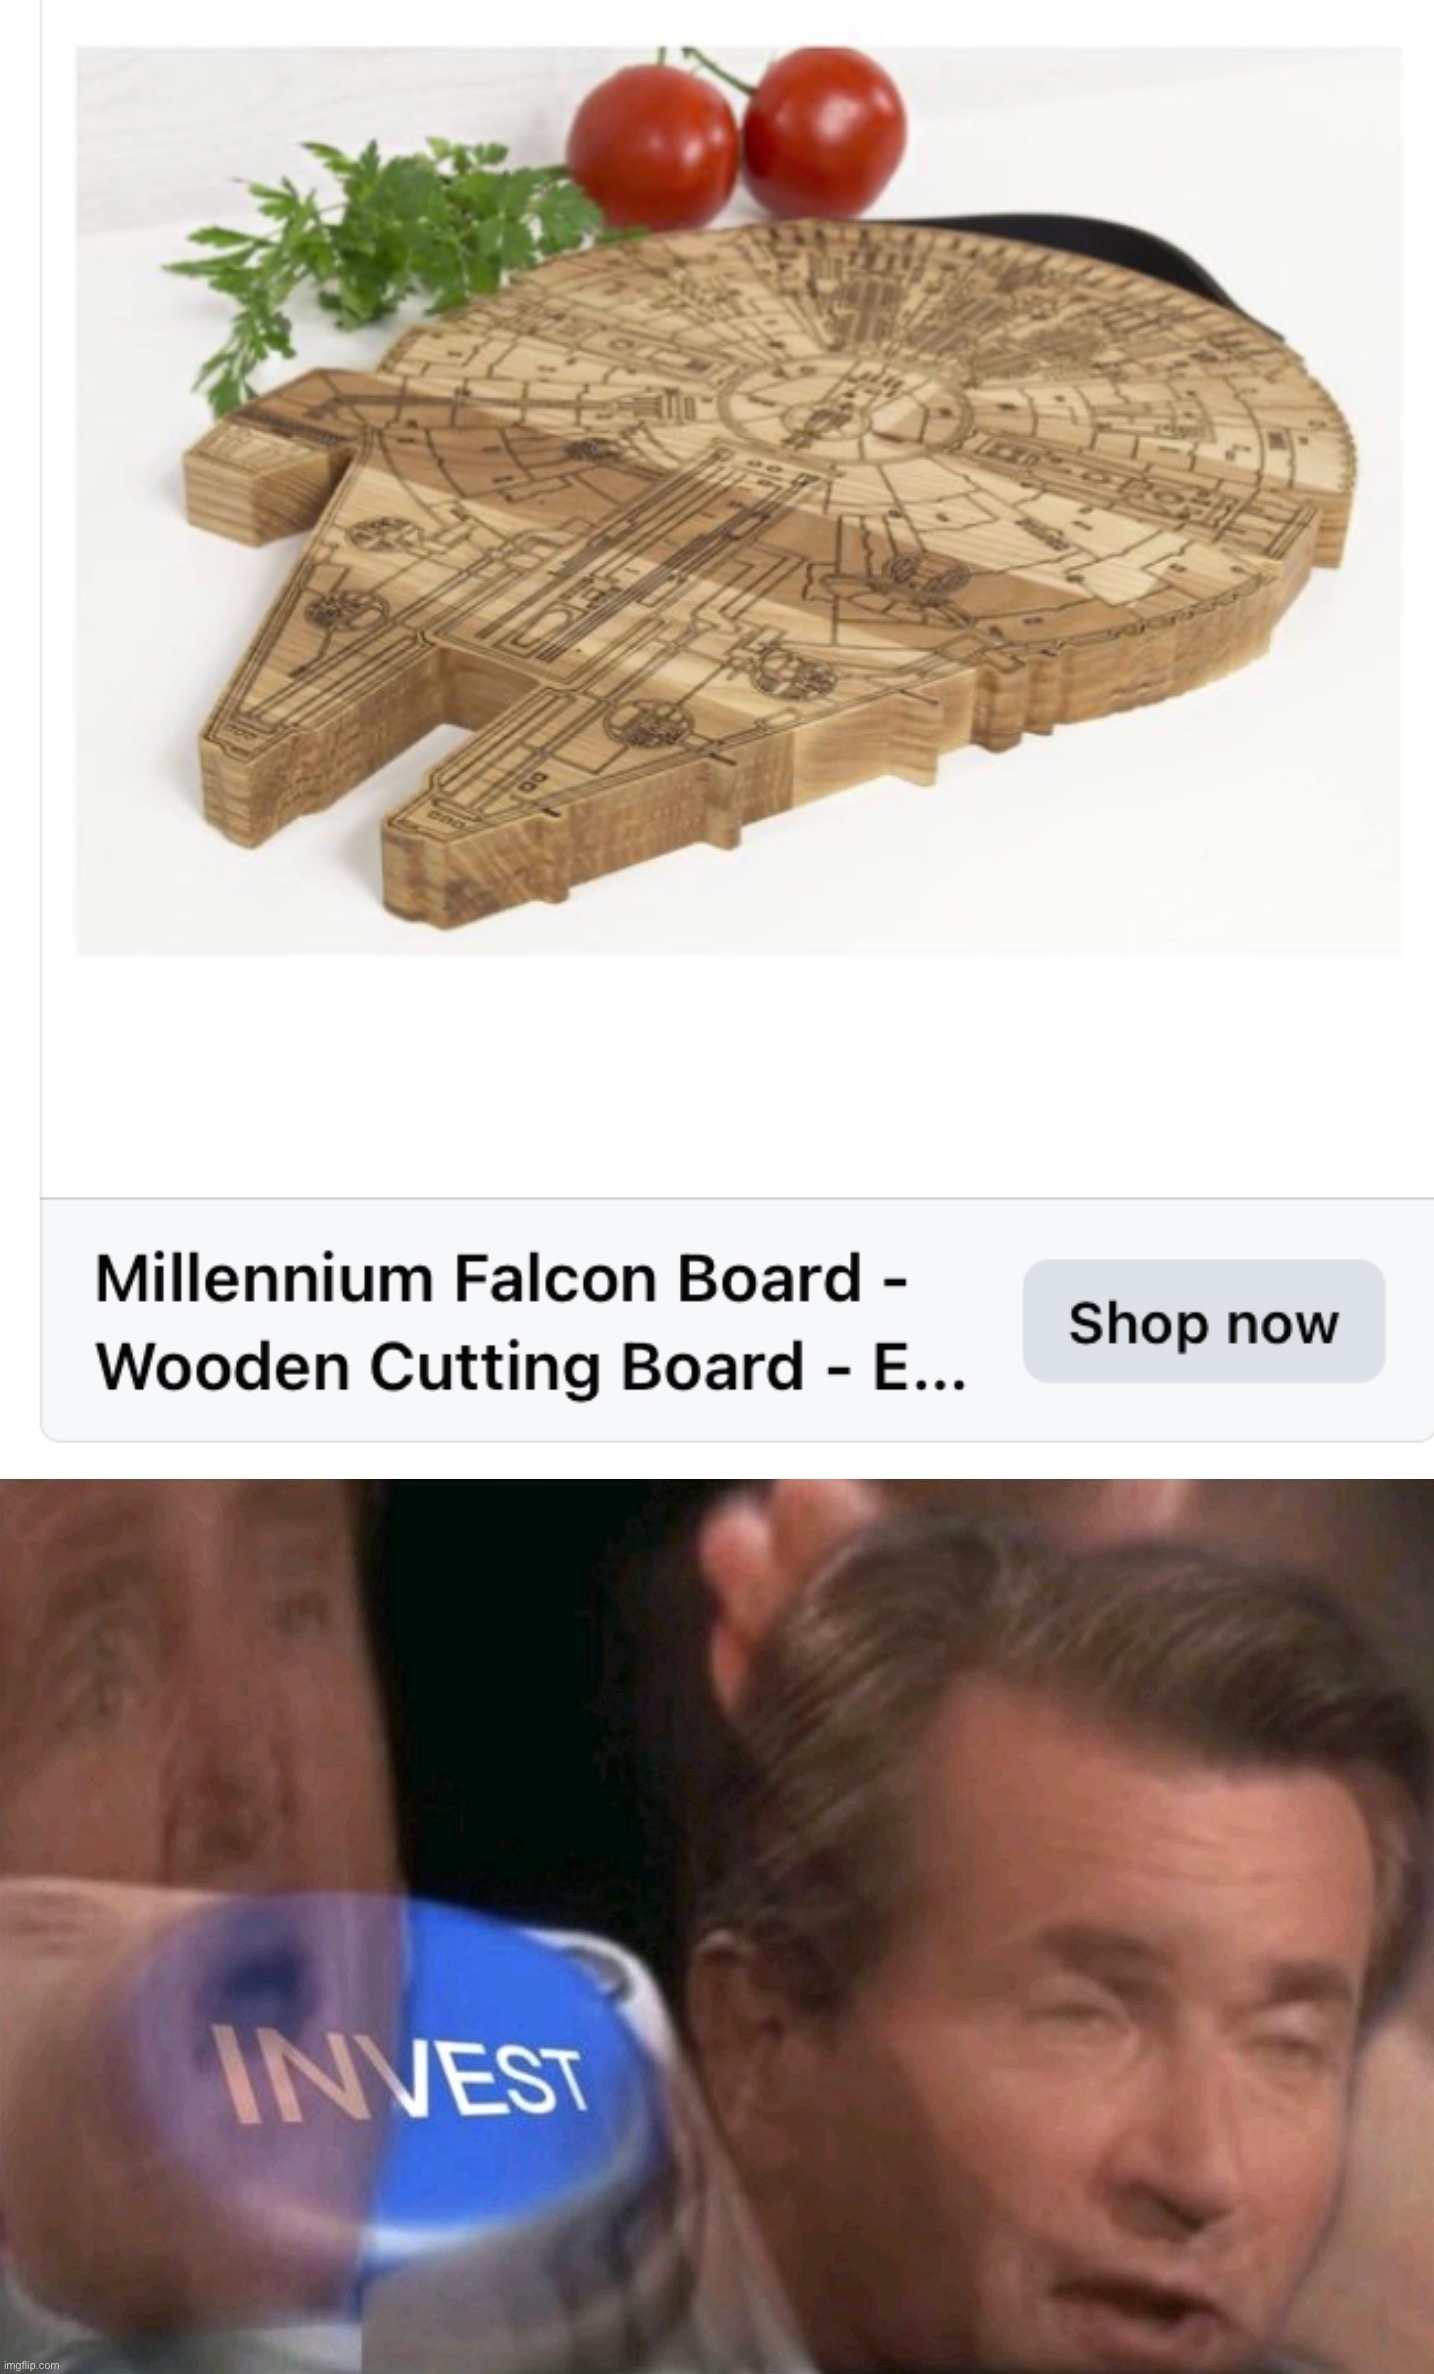 Invest | image tagged in millennium falcon cutting board,invest,millennium falcon,star wars,star wars meme,shopping | made w/ Imgflip meme maker